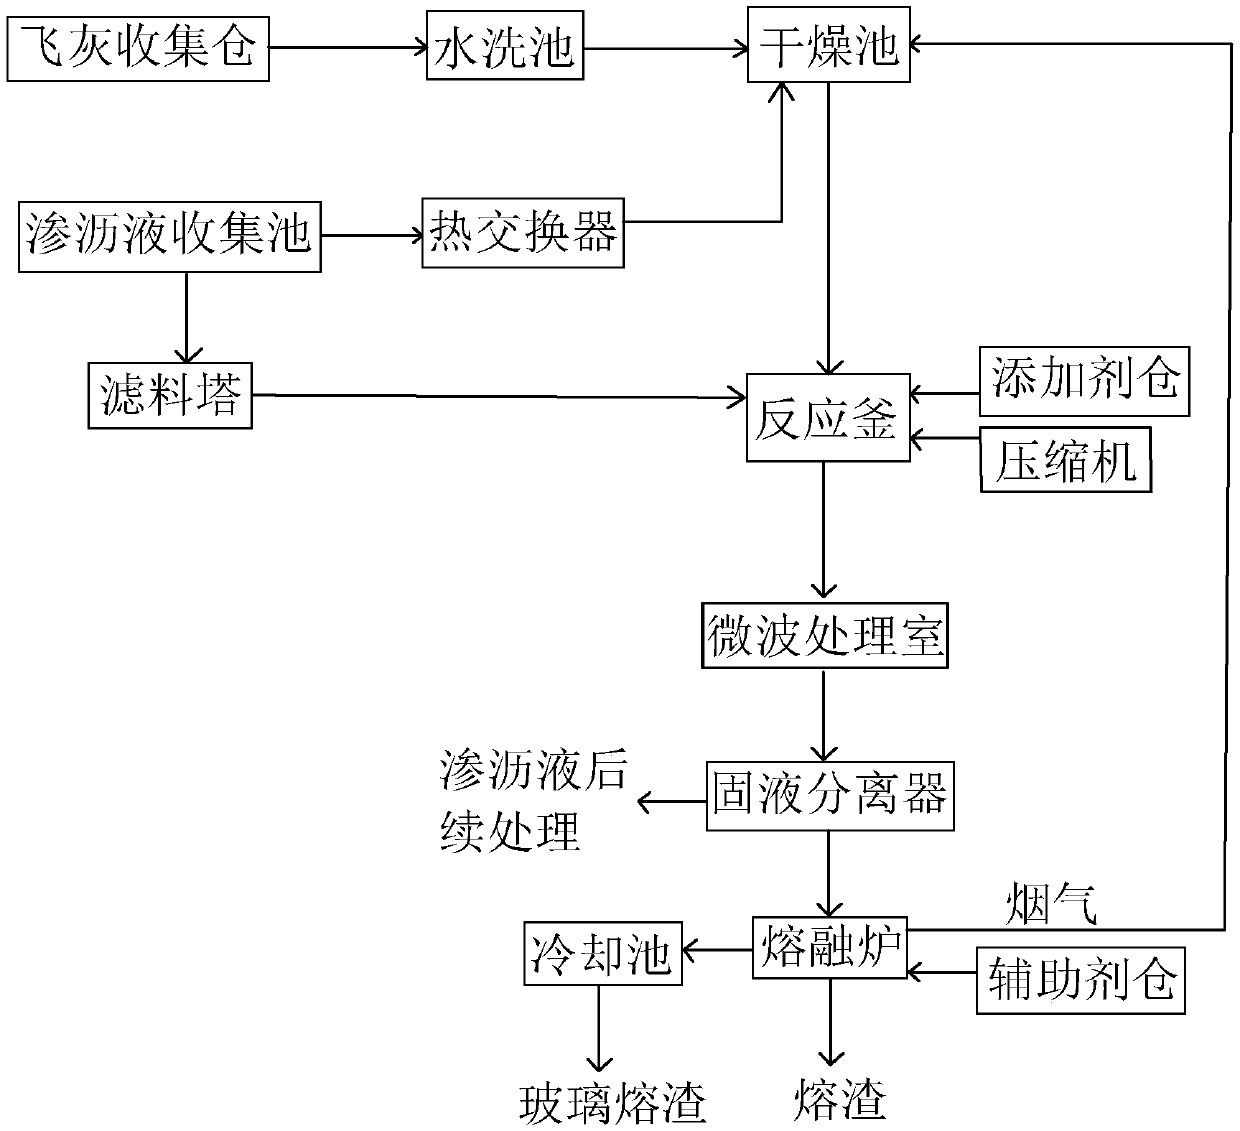 Treatment system for cooperatively treating garbage incineration fly ash and garbage leachate